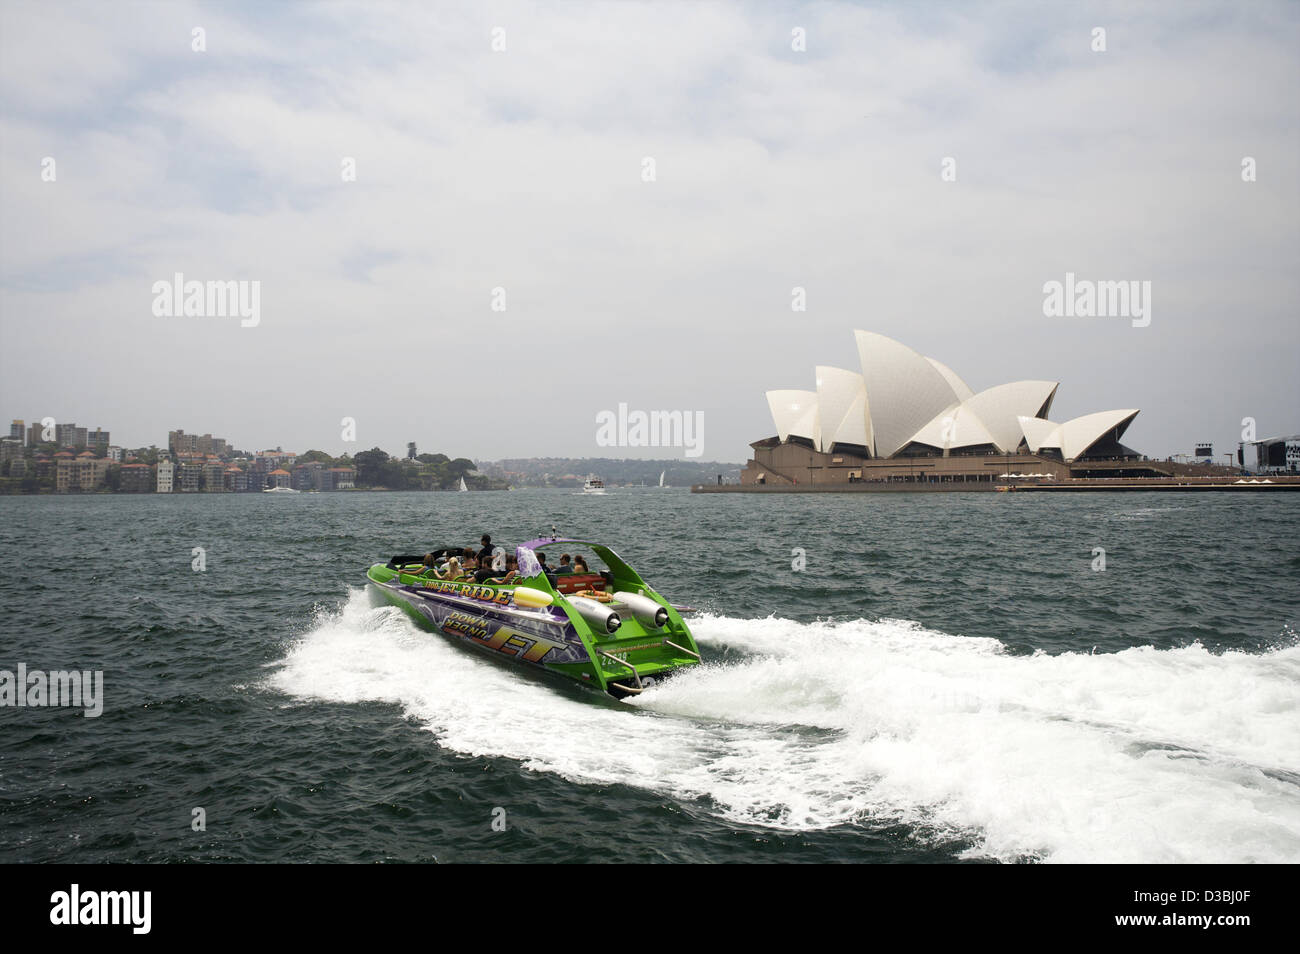 Das Sydney Opera House Performing Arts Centre in Sydney, New South Wales, Australien Stockfoto